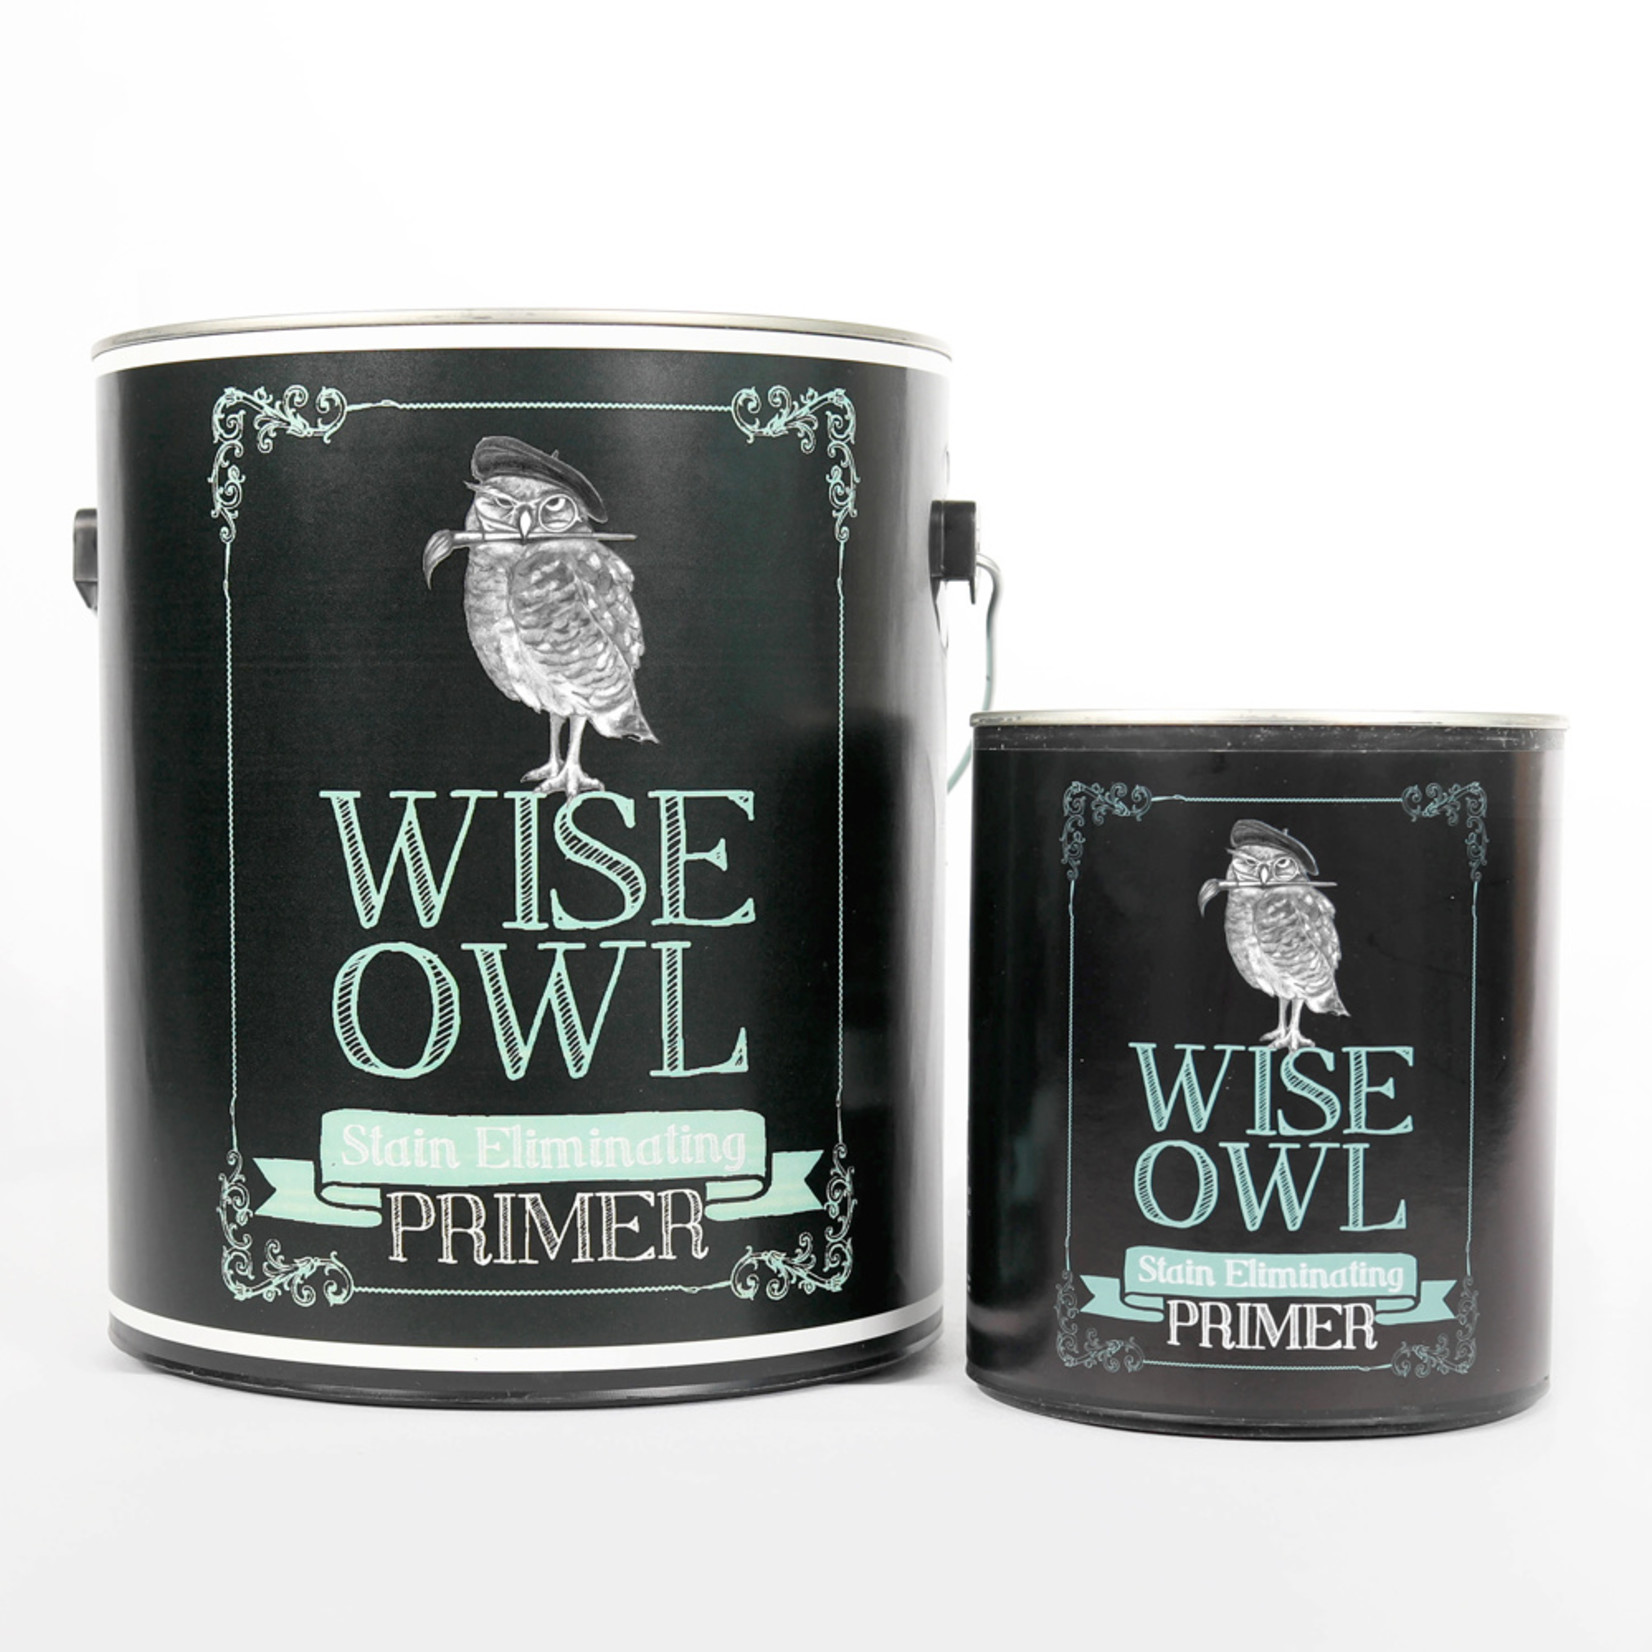 Wise Owl Stain Eliminating Primer, Clear, 32 oz